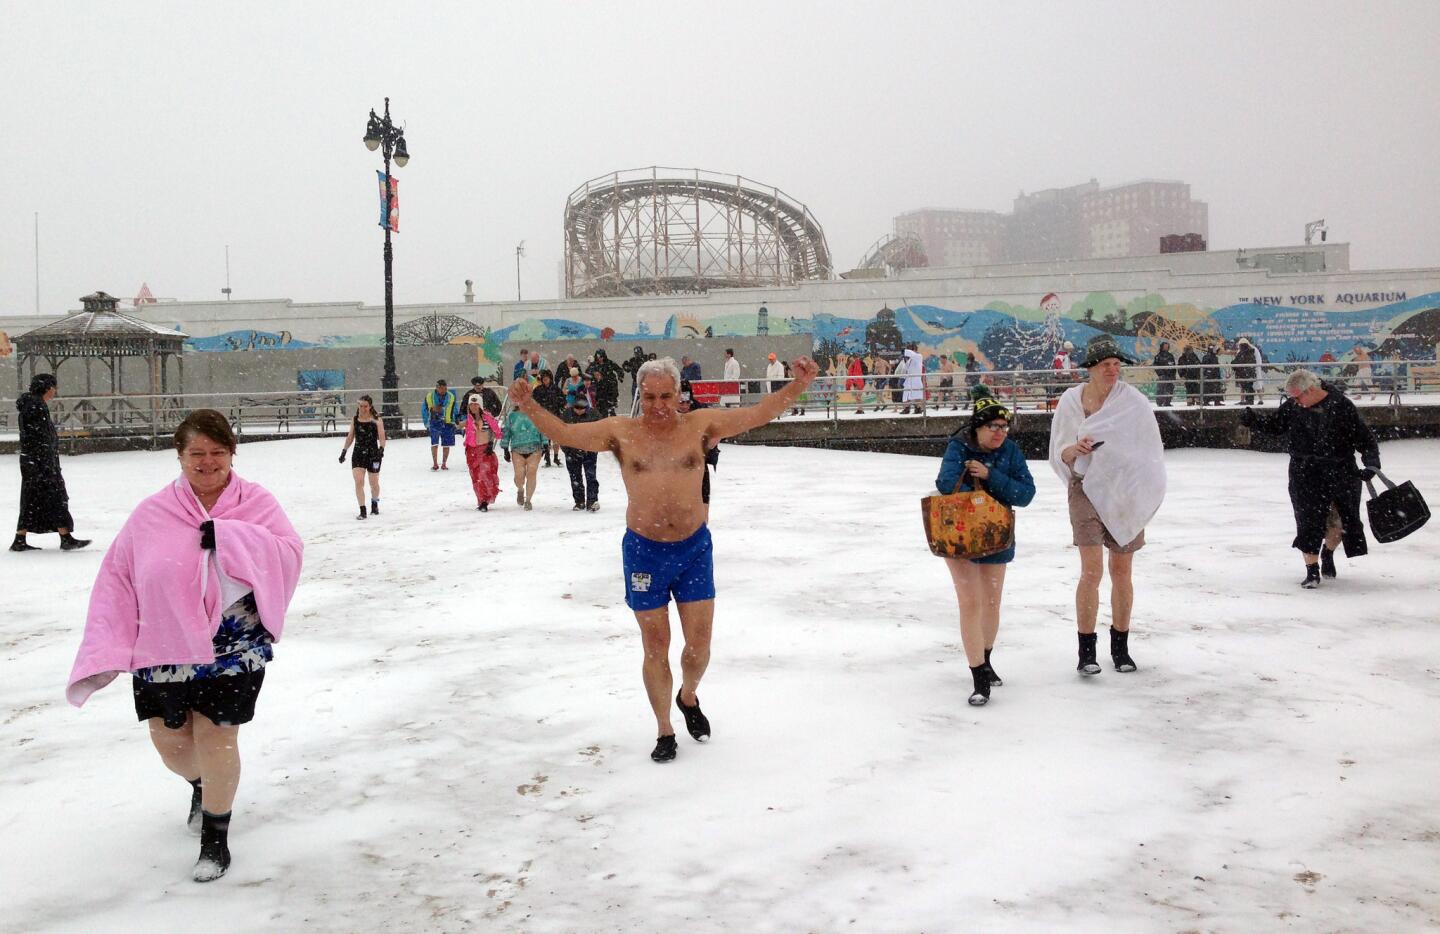 Louis Padilla, in blue swim trunks, and other members of the Coney Island Polar Bear Club in New York walk through the snow toward the water for their weekly winter swim. The 112-year-old club meets each Sunday from November until April for a dunk, which members swear is good for their health.